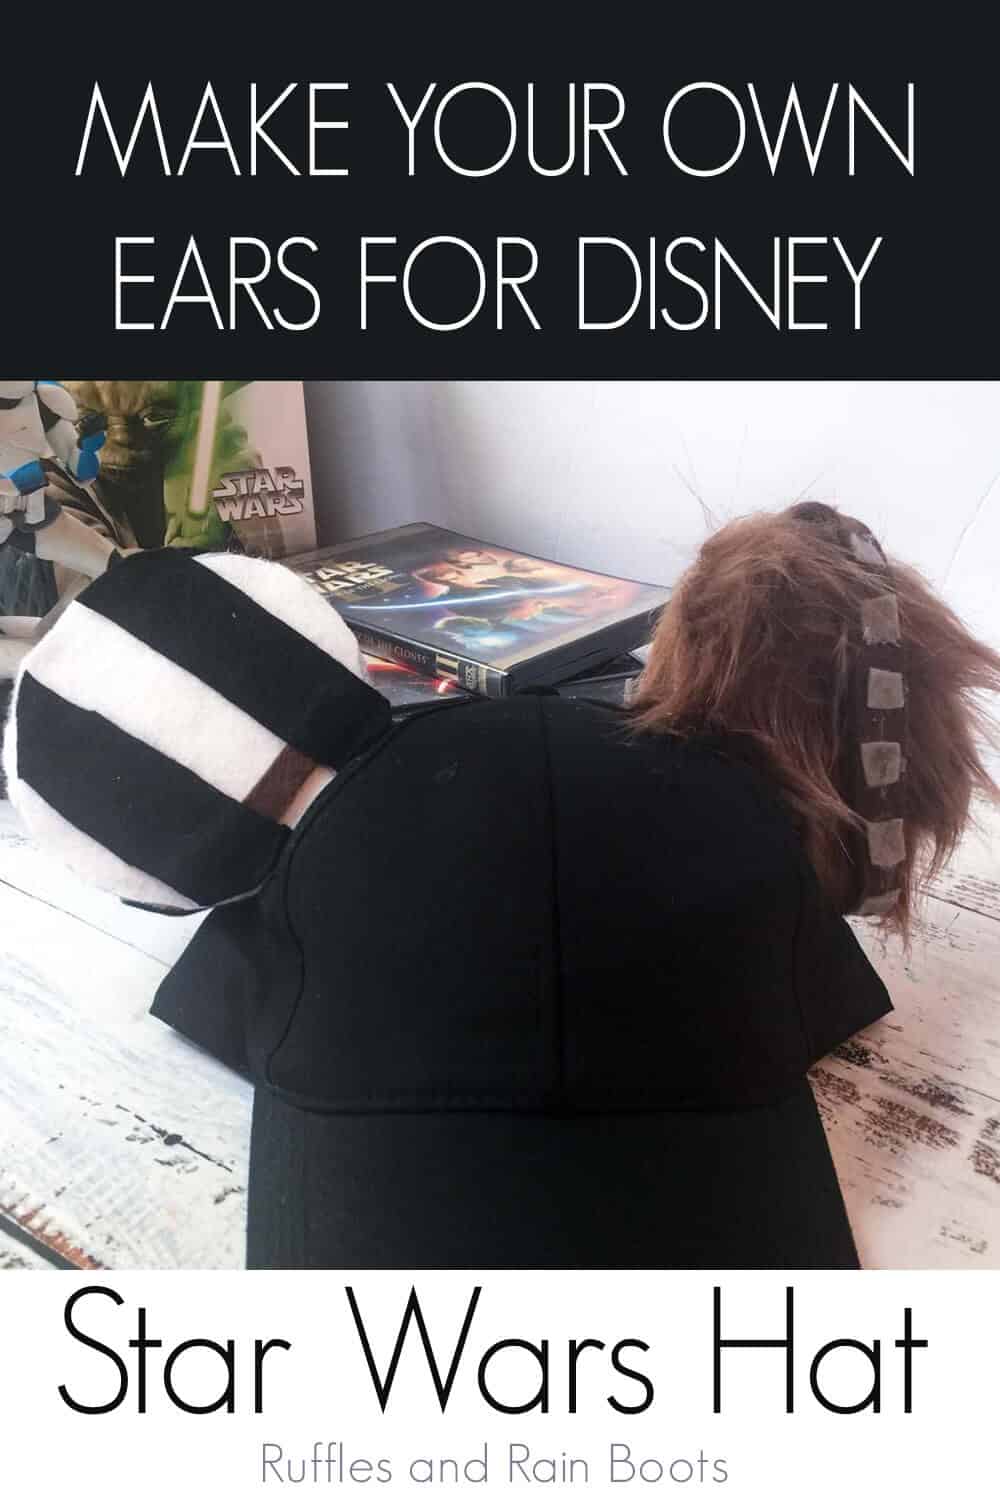 diy mickey ears for star wars galaxy edge with text which reads make your own ears for disney star wars hat